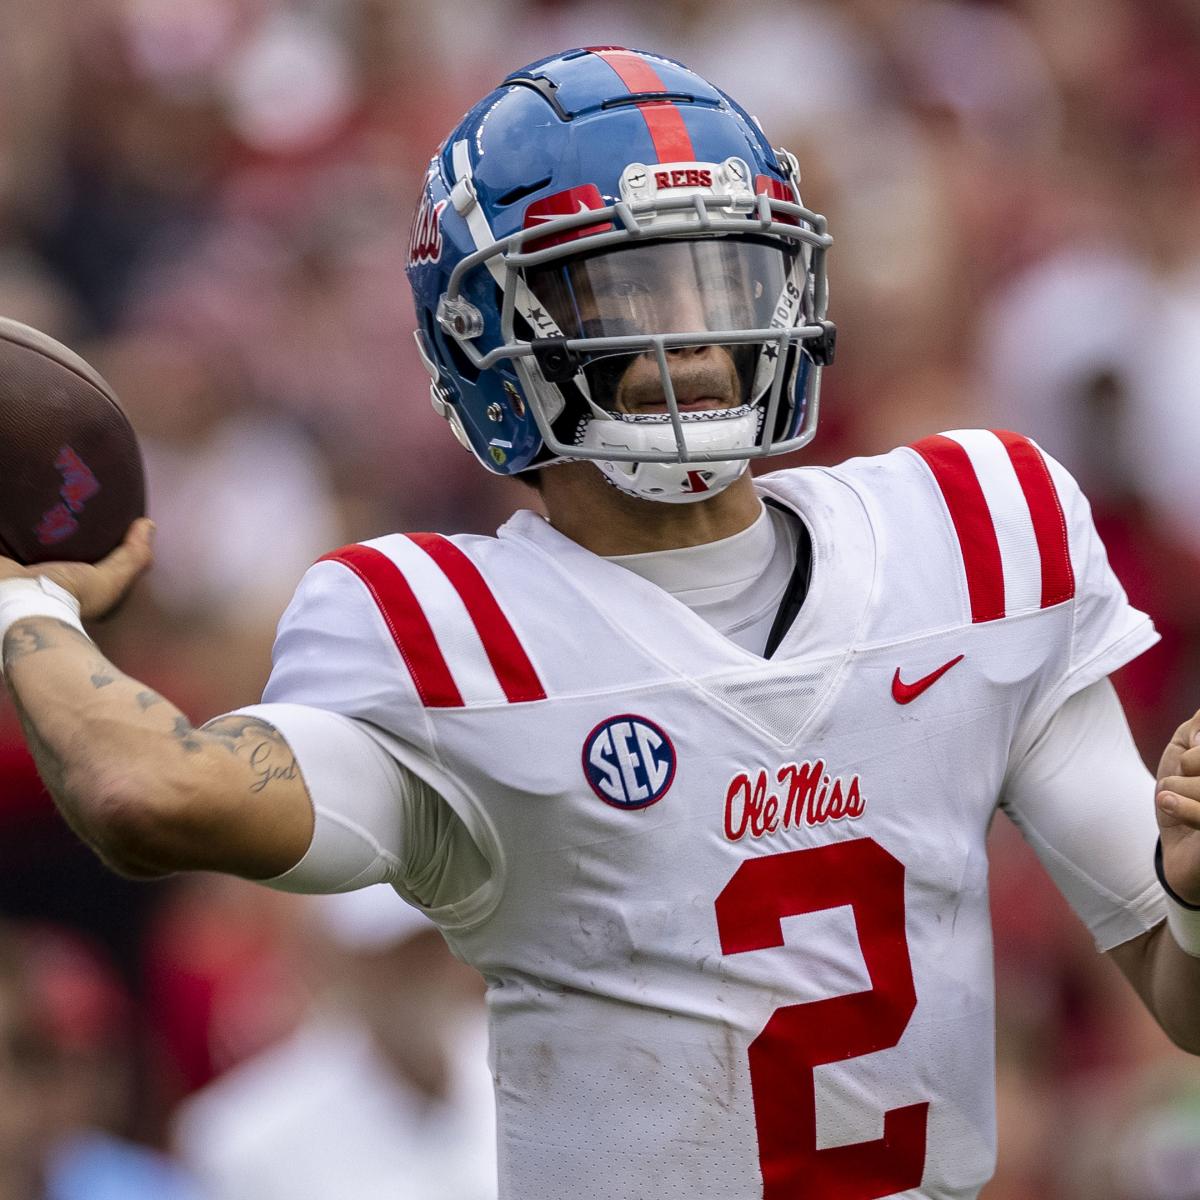 Ranking of the 10 best quarterbacks in college football in 2021